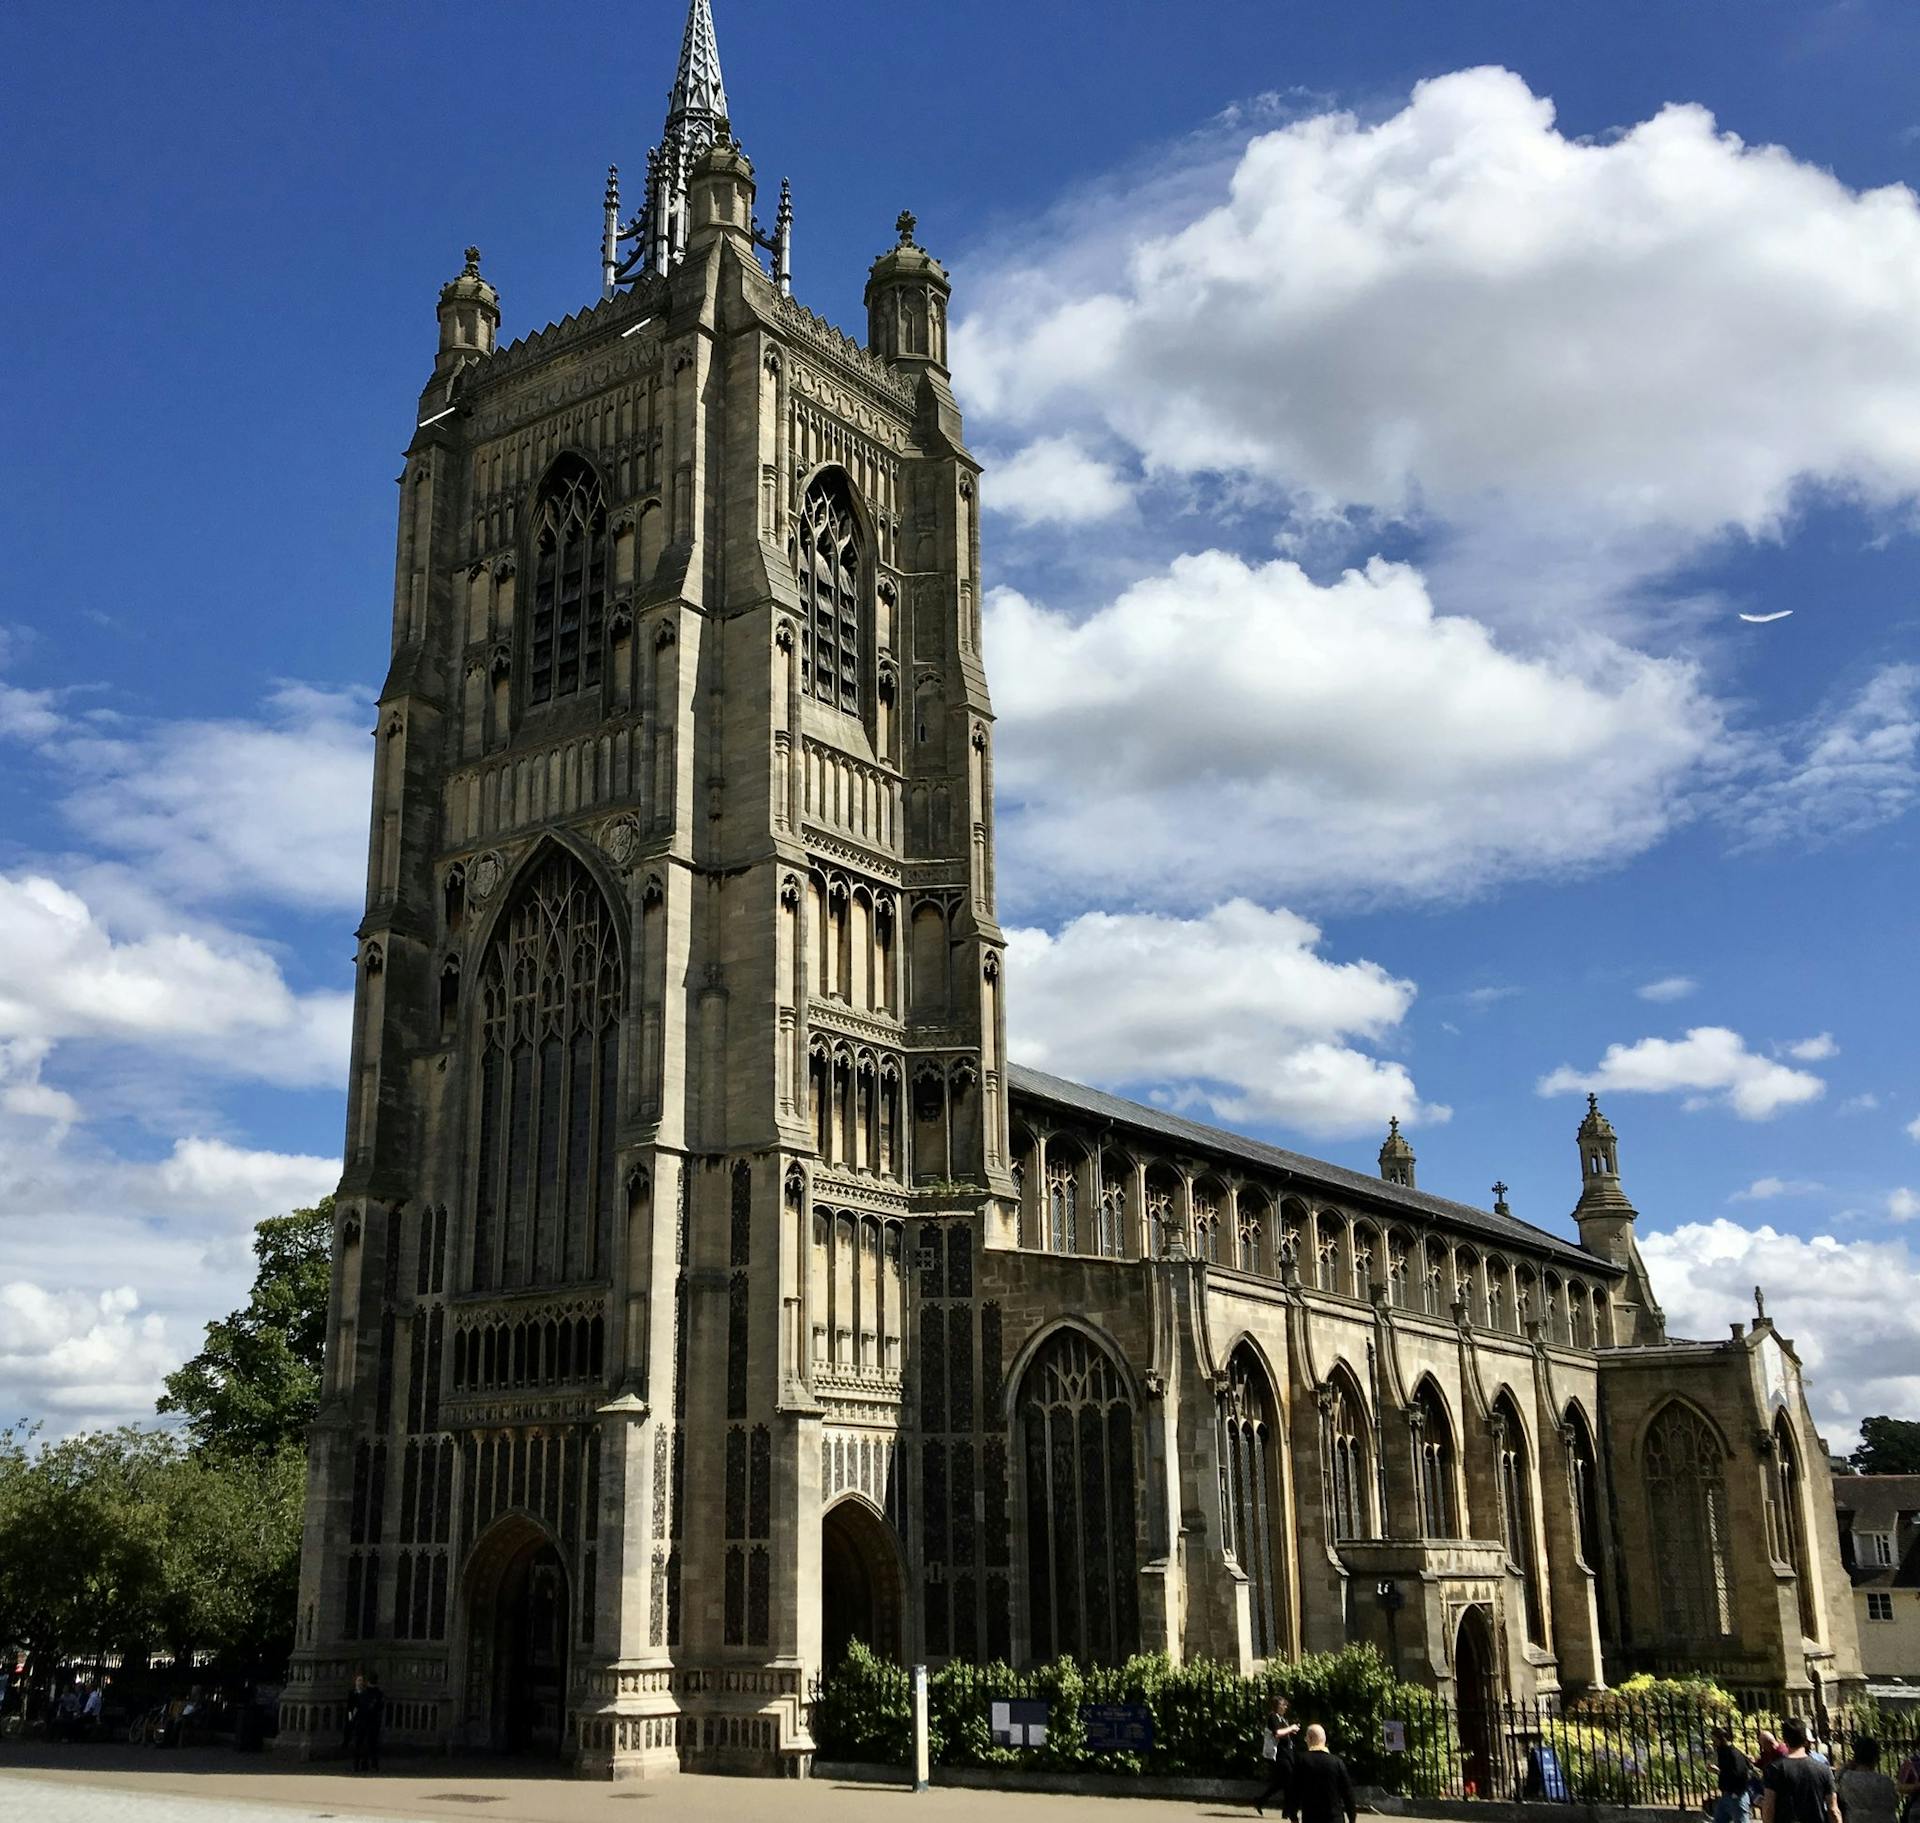 <p>St Peter Mancroft is a parish church in Norwich, Norfolk, England. It is one of the largest and finest churches in the city, with a history dating back to the 11th century. </p><p><br></p><p>It has a beautiful Gothic architecture, a rich collection of church silver, and a famous organ.</p><p><br></p>